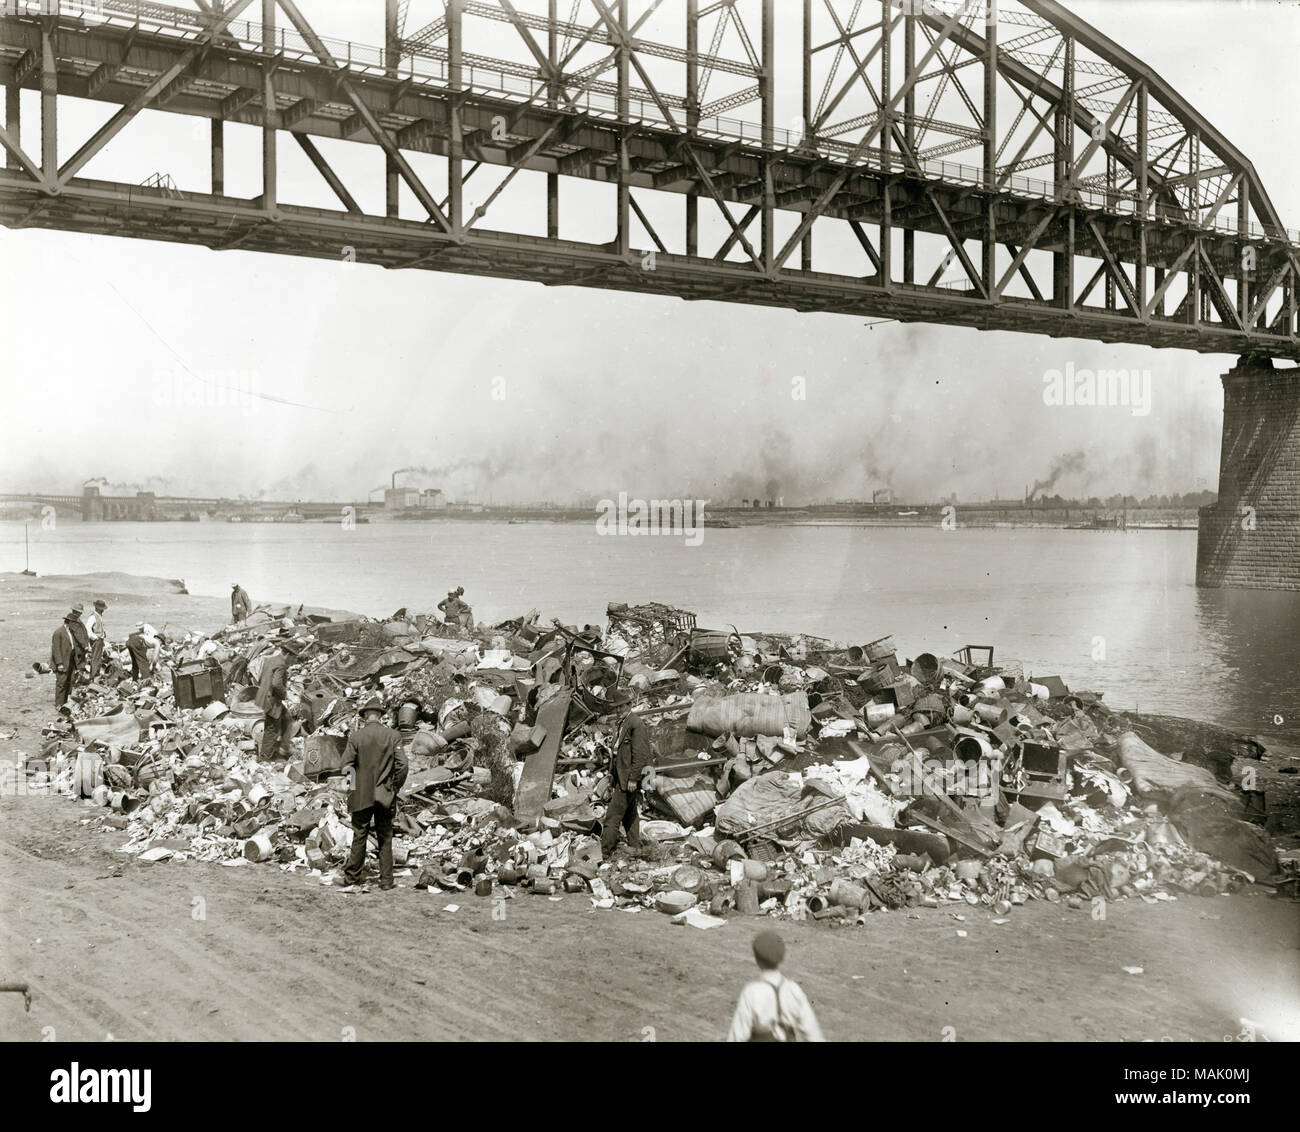 Men going through a rubbish pile on the riverfront south of the Municipal Bridge, which was later renamed the MacArthur Bridge. Men going through a rubbish pile on the Mississippi riverfront south of Municipal (MacArthur) Bridge. Started in 1907 and finally opened for automobile traffic in 1917, the Municipal Bridge was built by the city of St. Louis to compete with the monopoly of traffic across the Mississippi River held by the Terminal Railroad Association who owned both the Eads and the Merchants Bridges. The bridge featured an upper deck for automobile traffic and a lower deck for rail ca Stock Photo